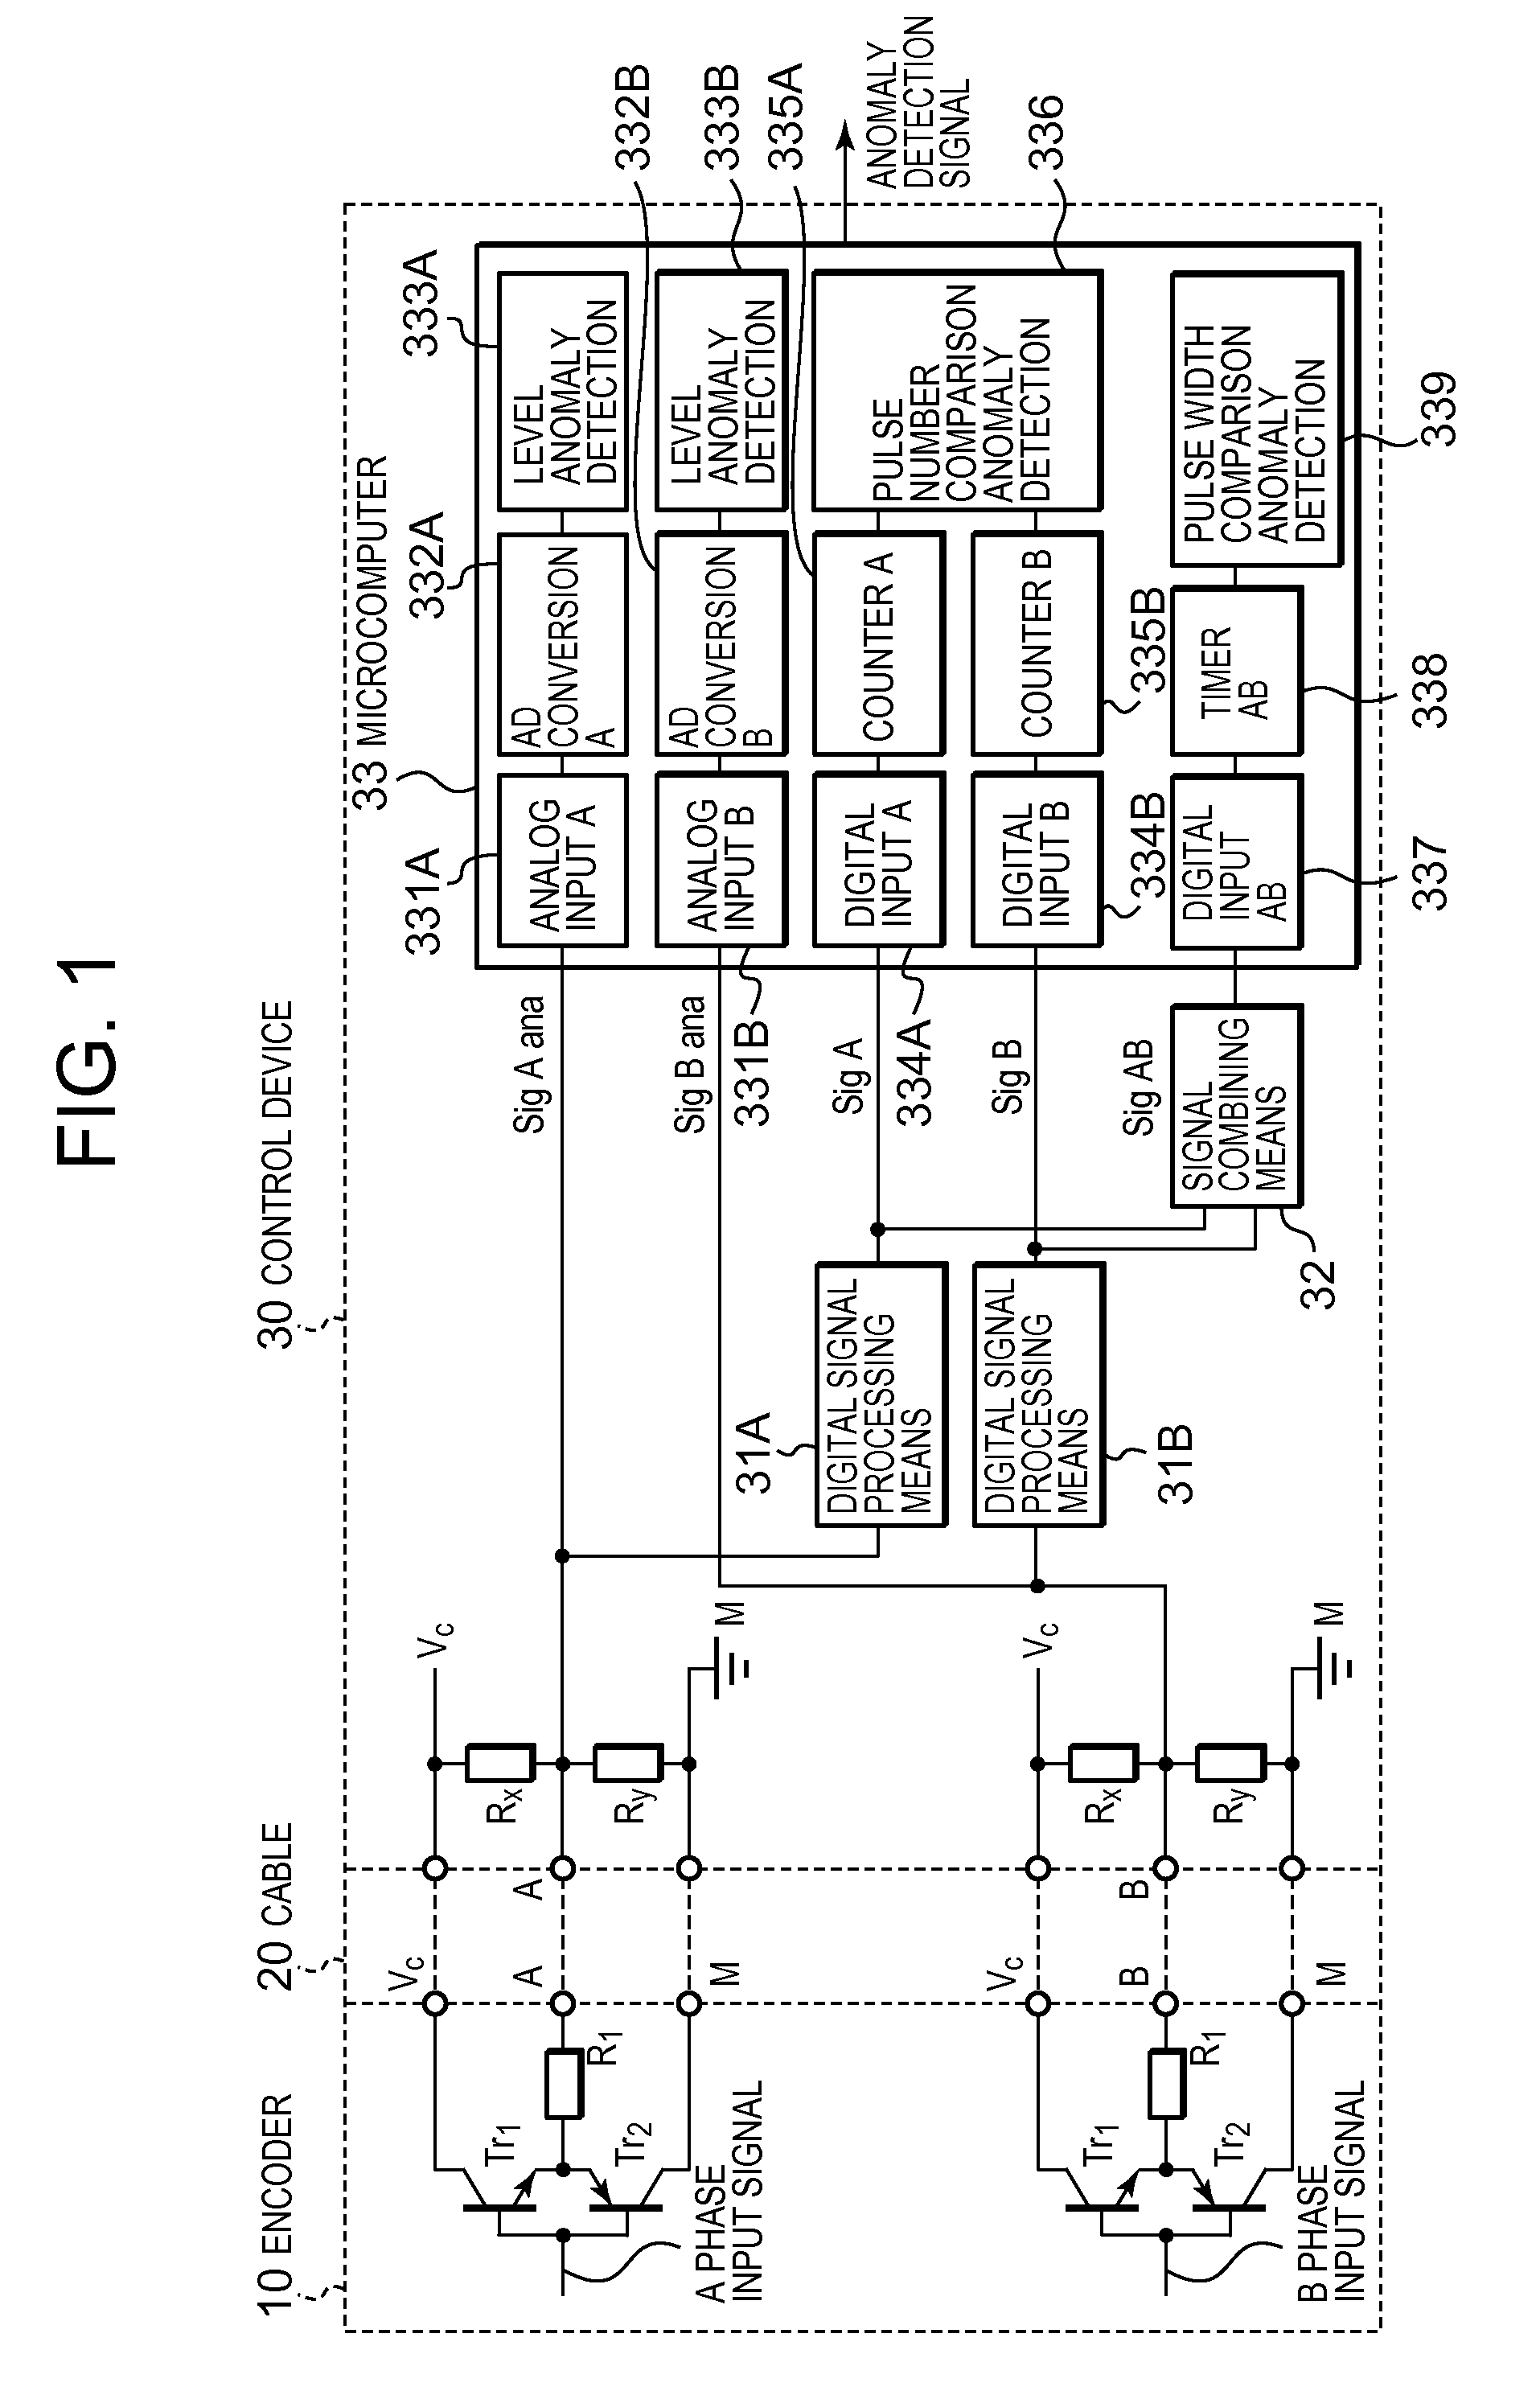 Anomaly monitoring device